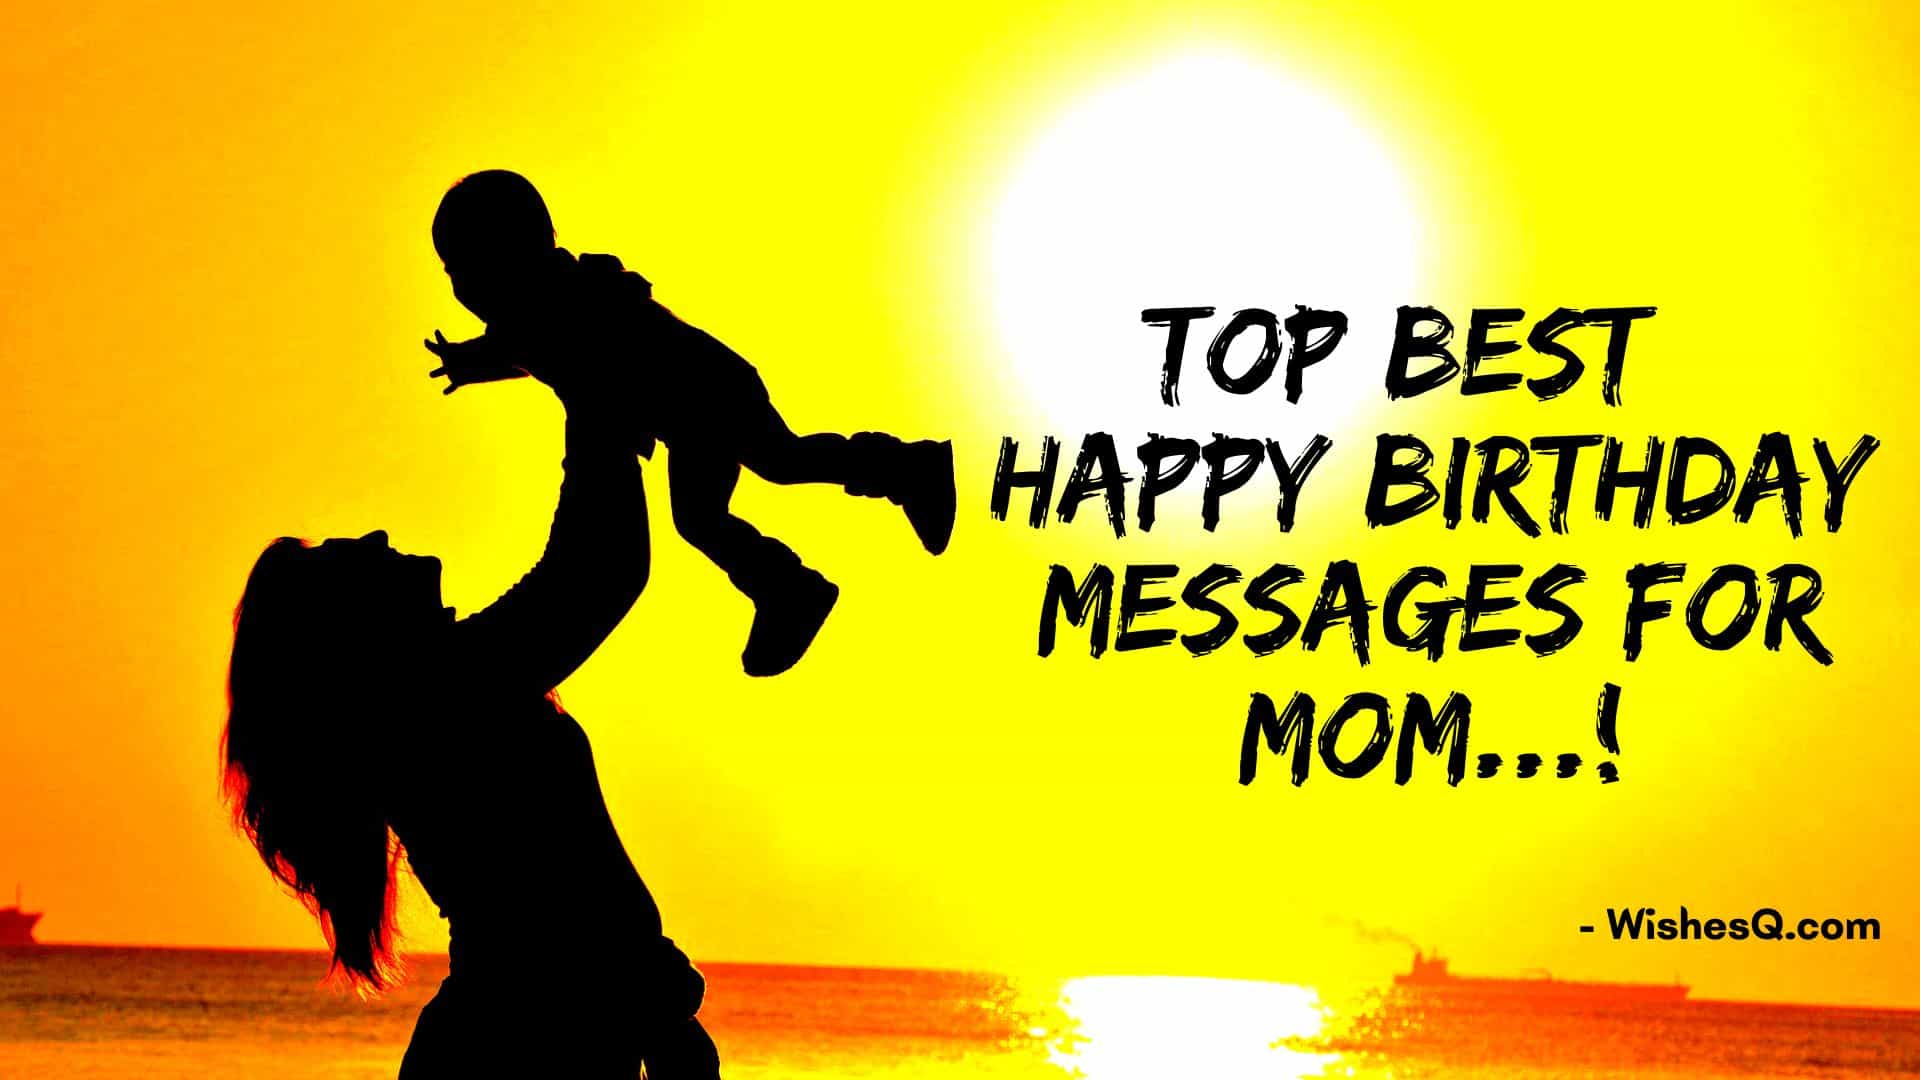 Top Best Happy Birthday Messages For Mom (2022)